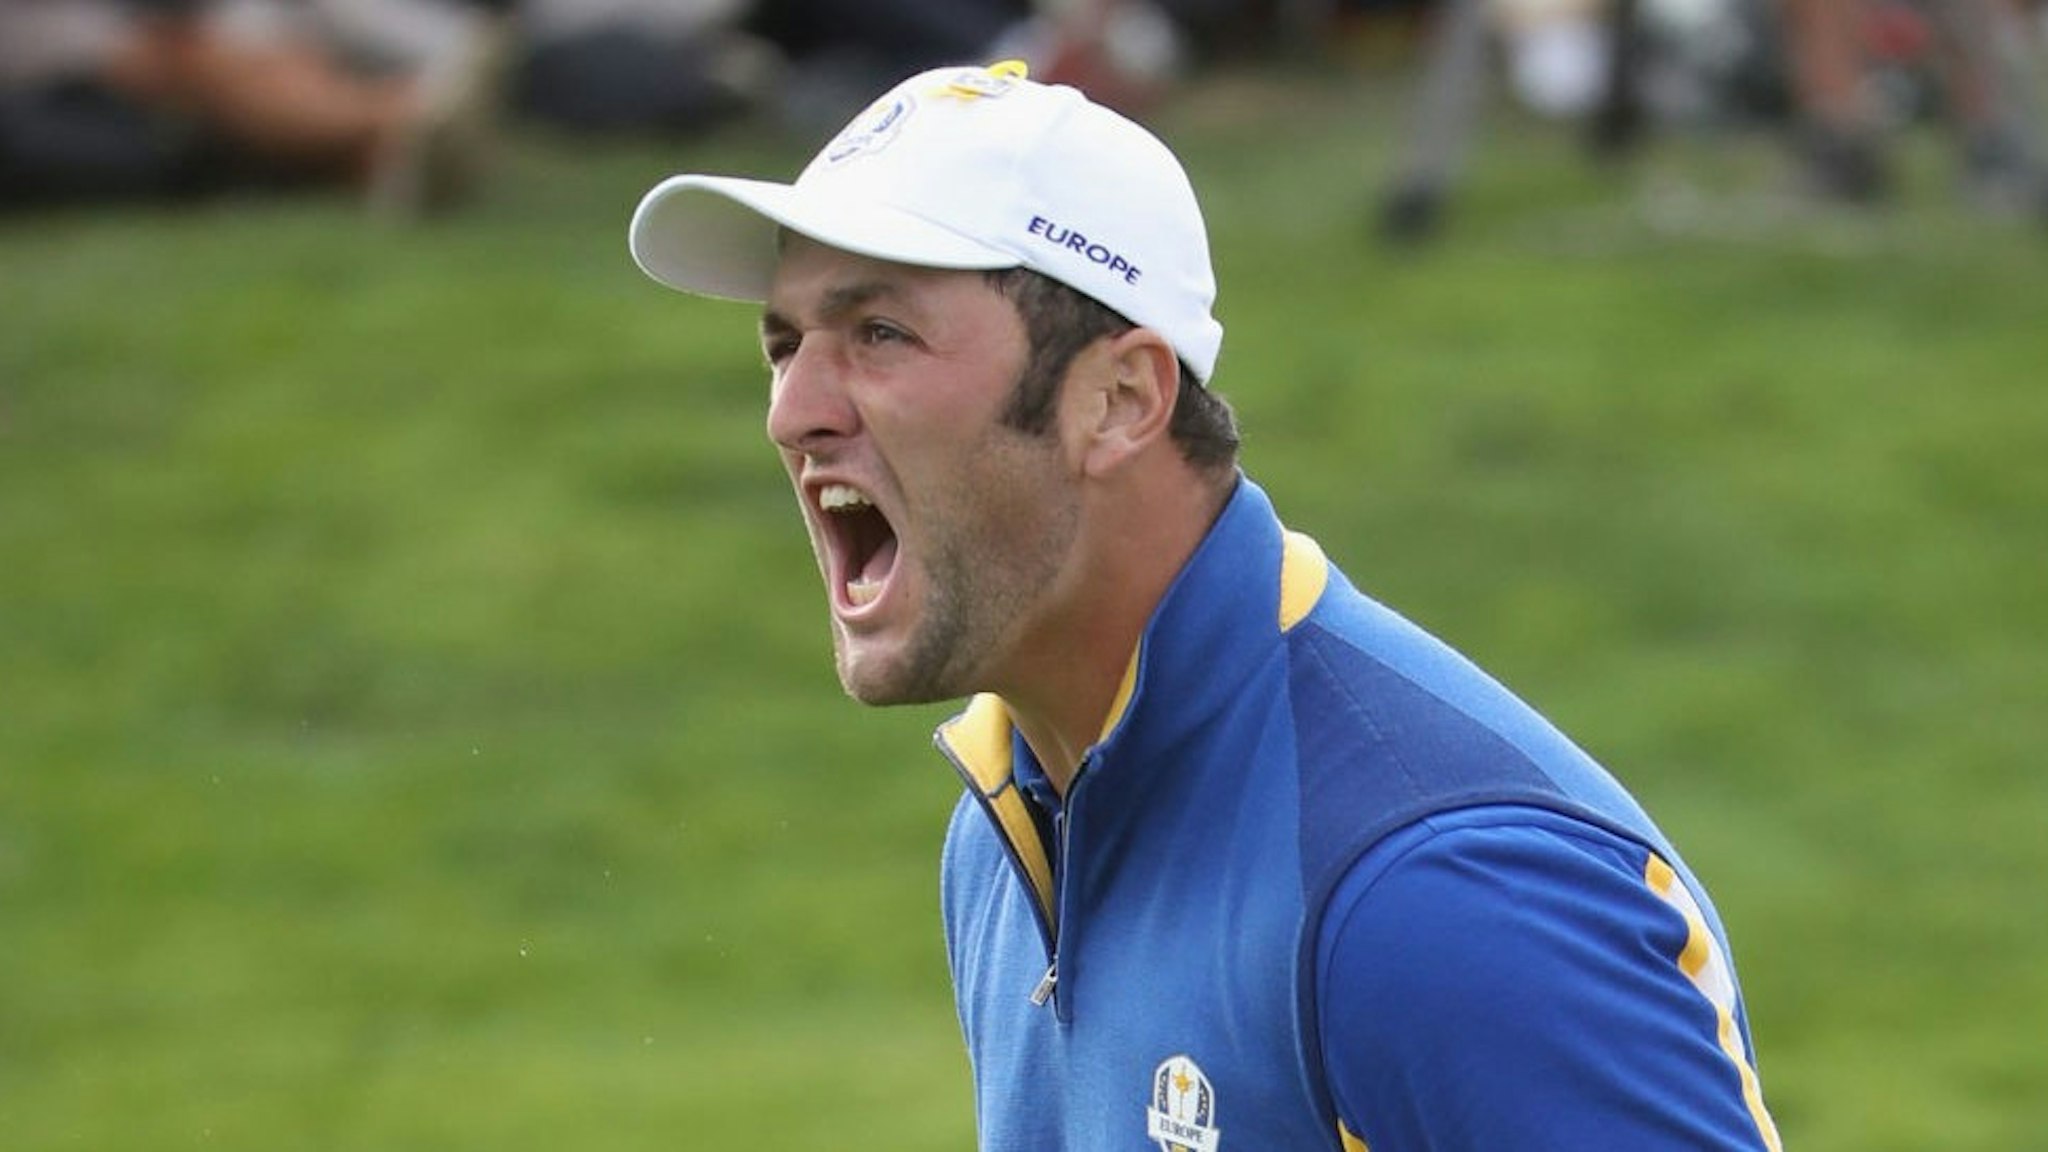 PARIS, FRANCE - SEPTEMBER 30: Jon Rahm of Europe celebrates winning his match on the 17th during singles matches of the 2018 Ryder Cup at Le Golf National on September 30, 2018 in Paris, France. (Photo by